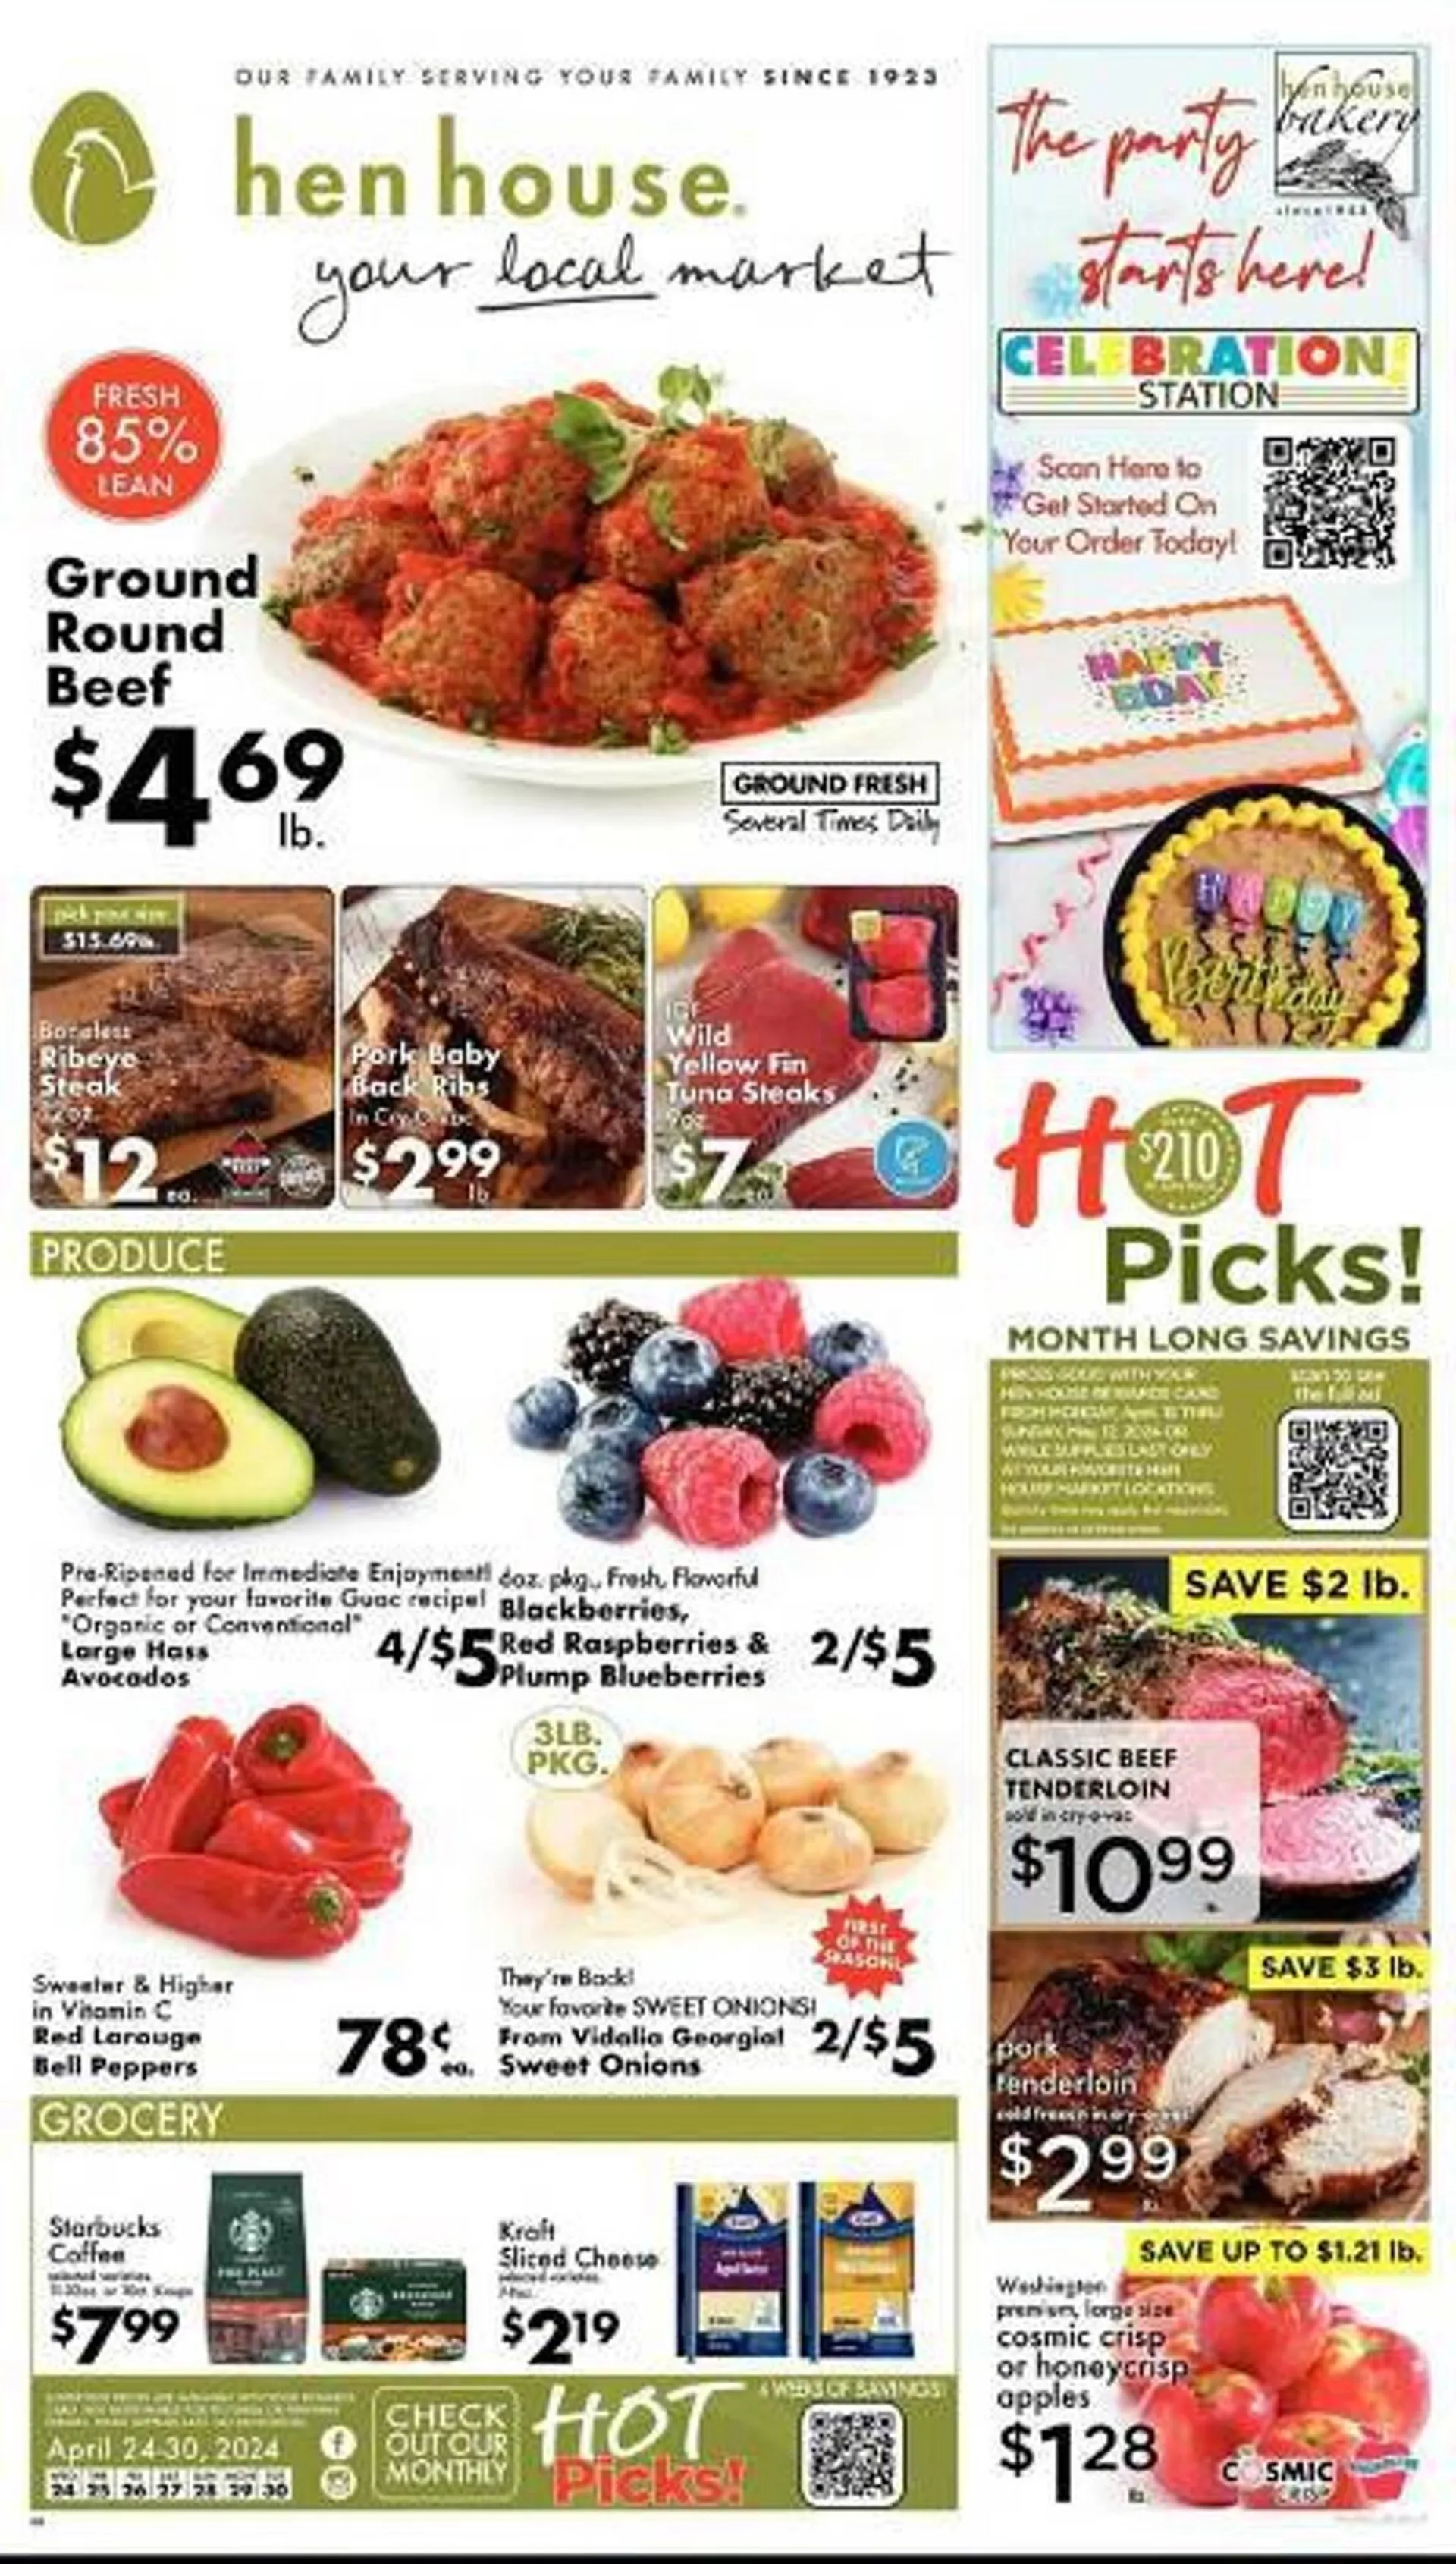 Hen House Weekly Ad - 1